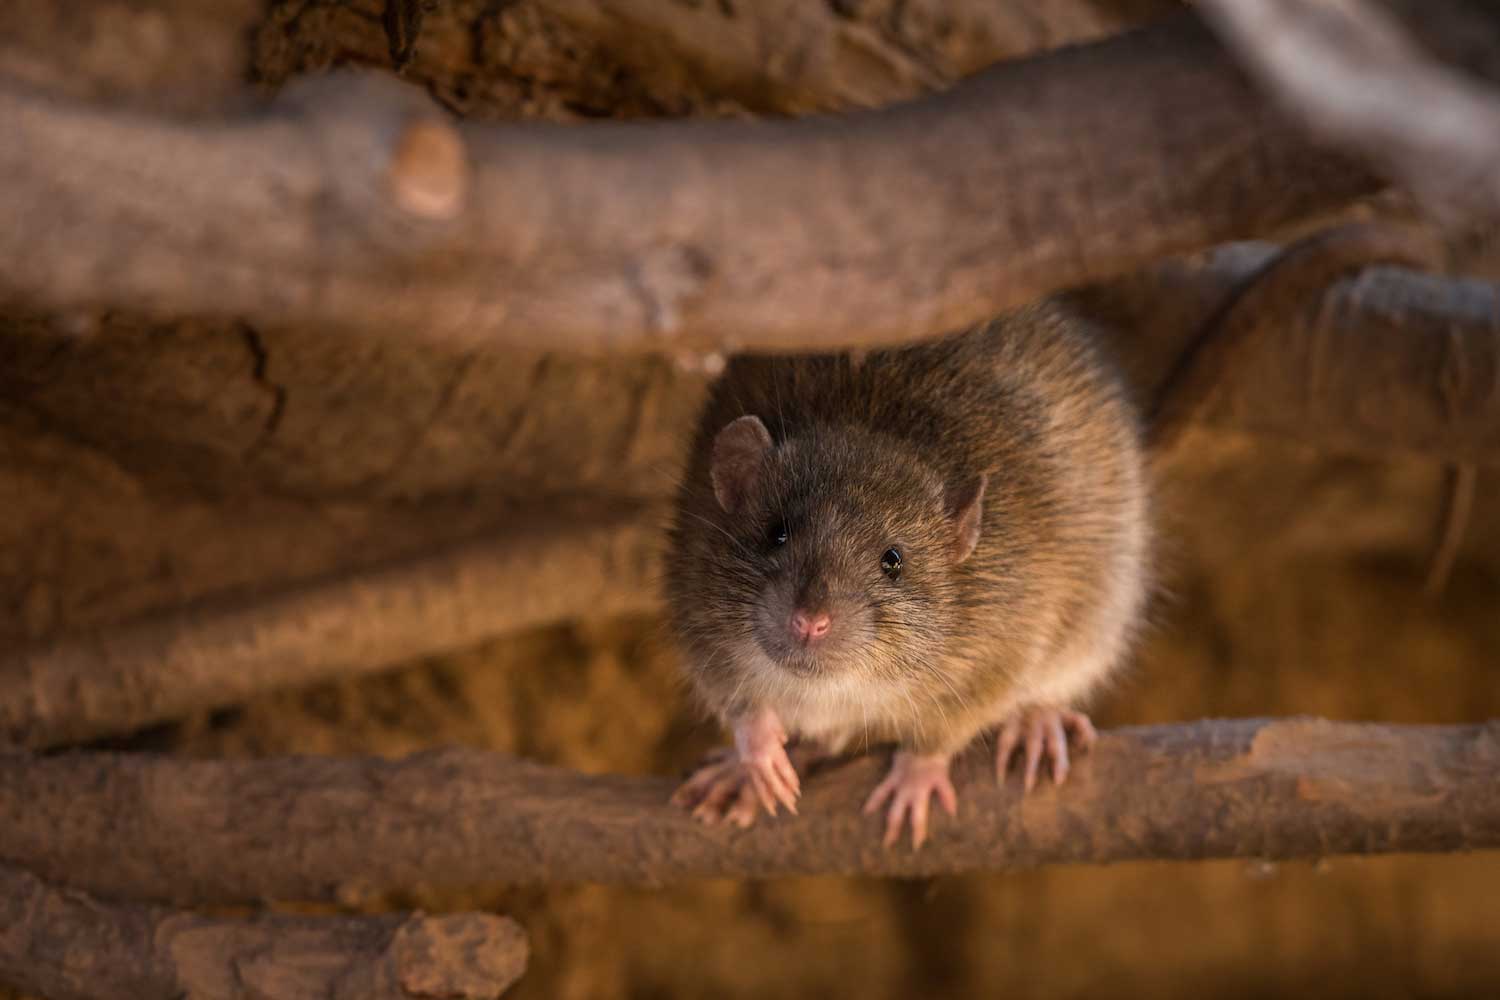 Using rat poison to control rodent infestations can have devastating  effects on other wildlife